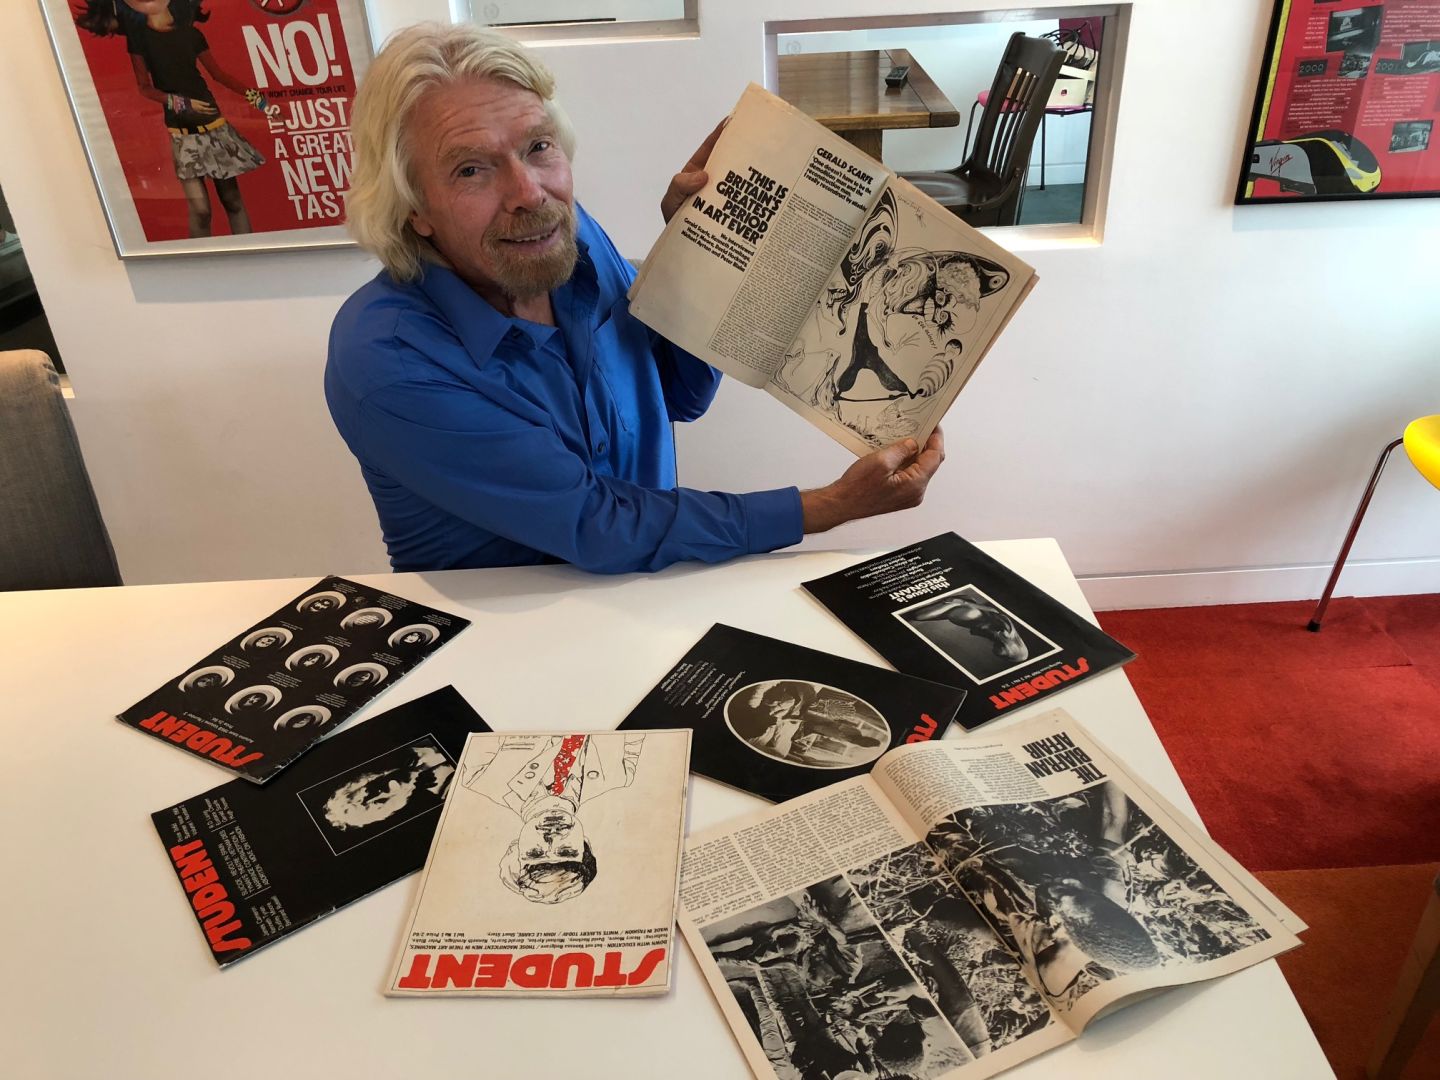 Richard Branson holding up old editions of Student Magazine